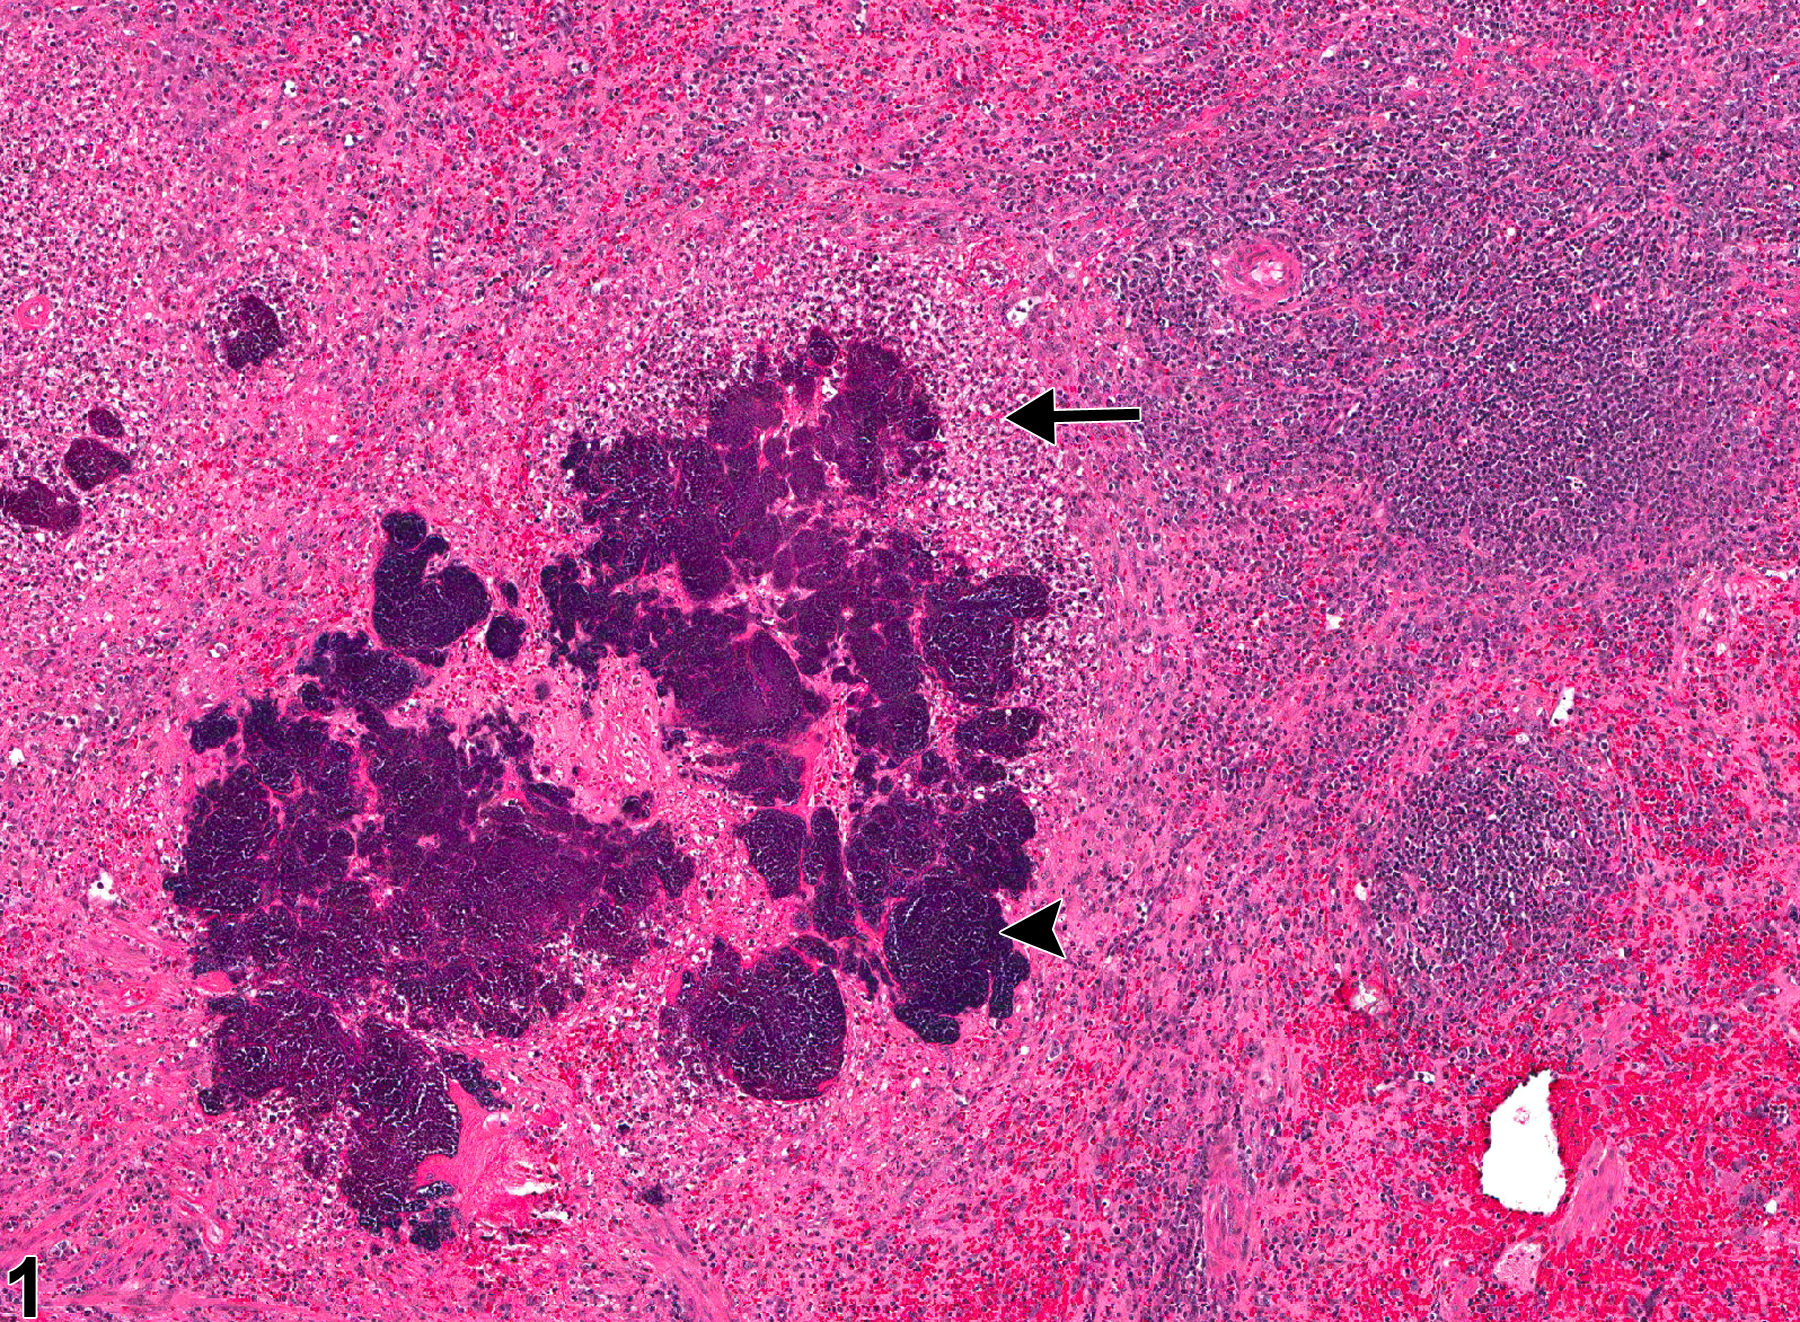 Image of inflammation in the spleen from a male F344/N rat in a chronic study